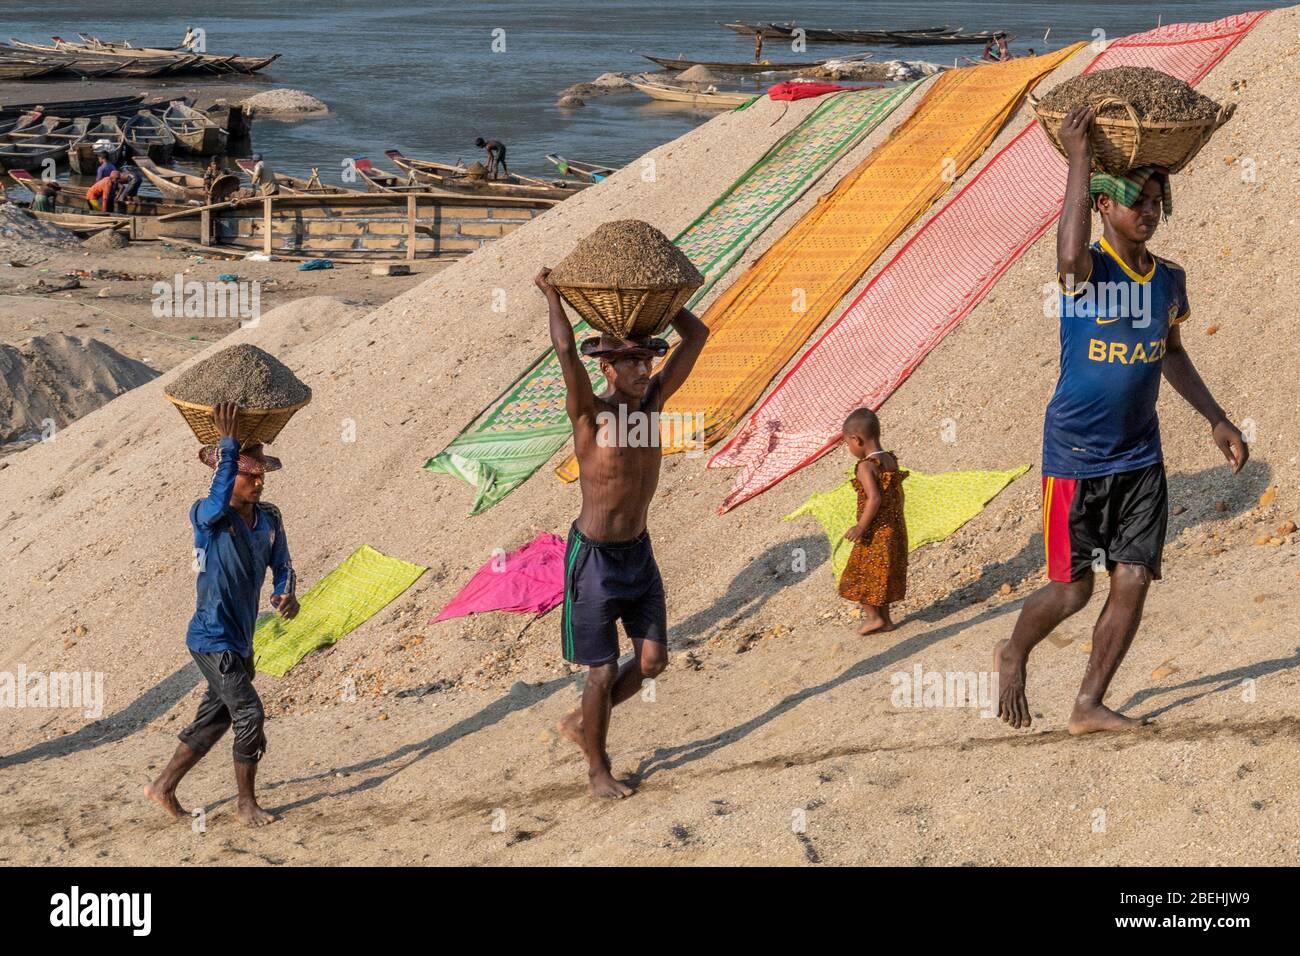 Workers with Baskets Carrying Gravel Dug out of the Goyain River in Jaflong, at the border with India. The gravel will be sieved to make concrete. Stock Photo